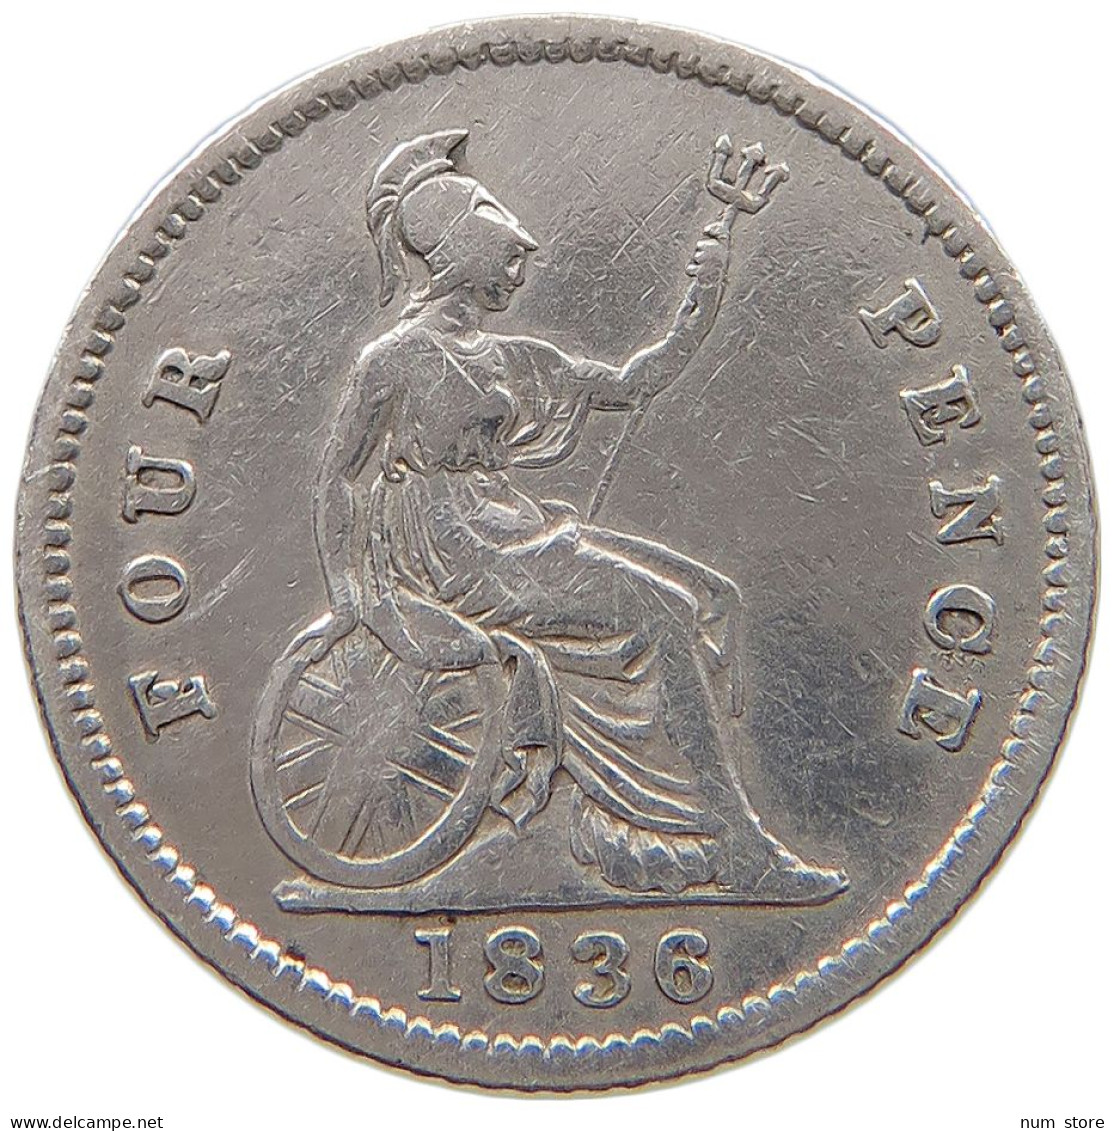 GREAT BRITAIN FOURPENCE 1836 WILLIAM IV. (1830-1837) #t108 0451 - G. 4 Pence/ Groat